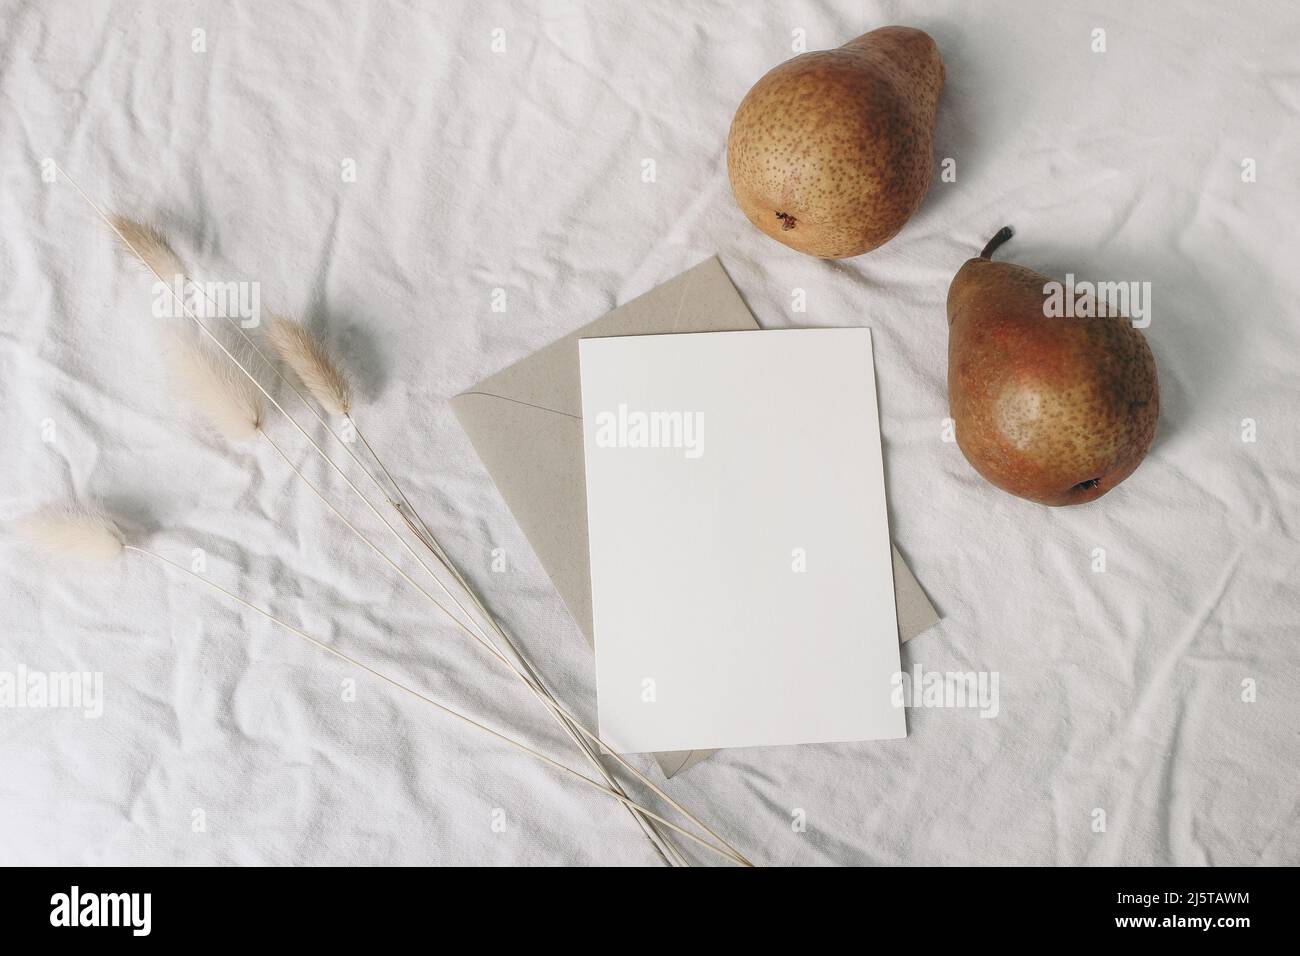 Autumn, summer still life. Bedroom composition. Blank greeting card mockup, pear fruits and envelope. Dry bunny tails, Lagurus grass. White crinkled Stock Photo